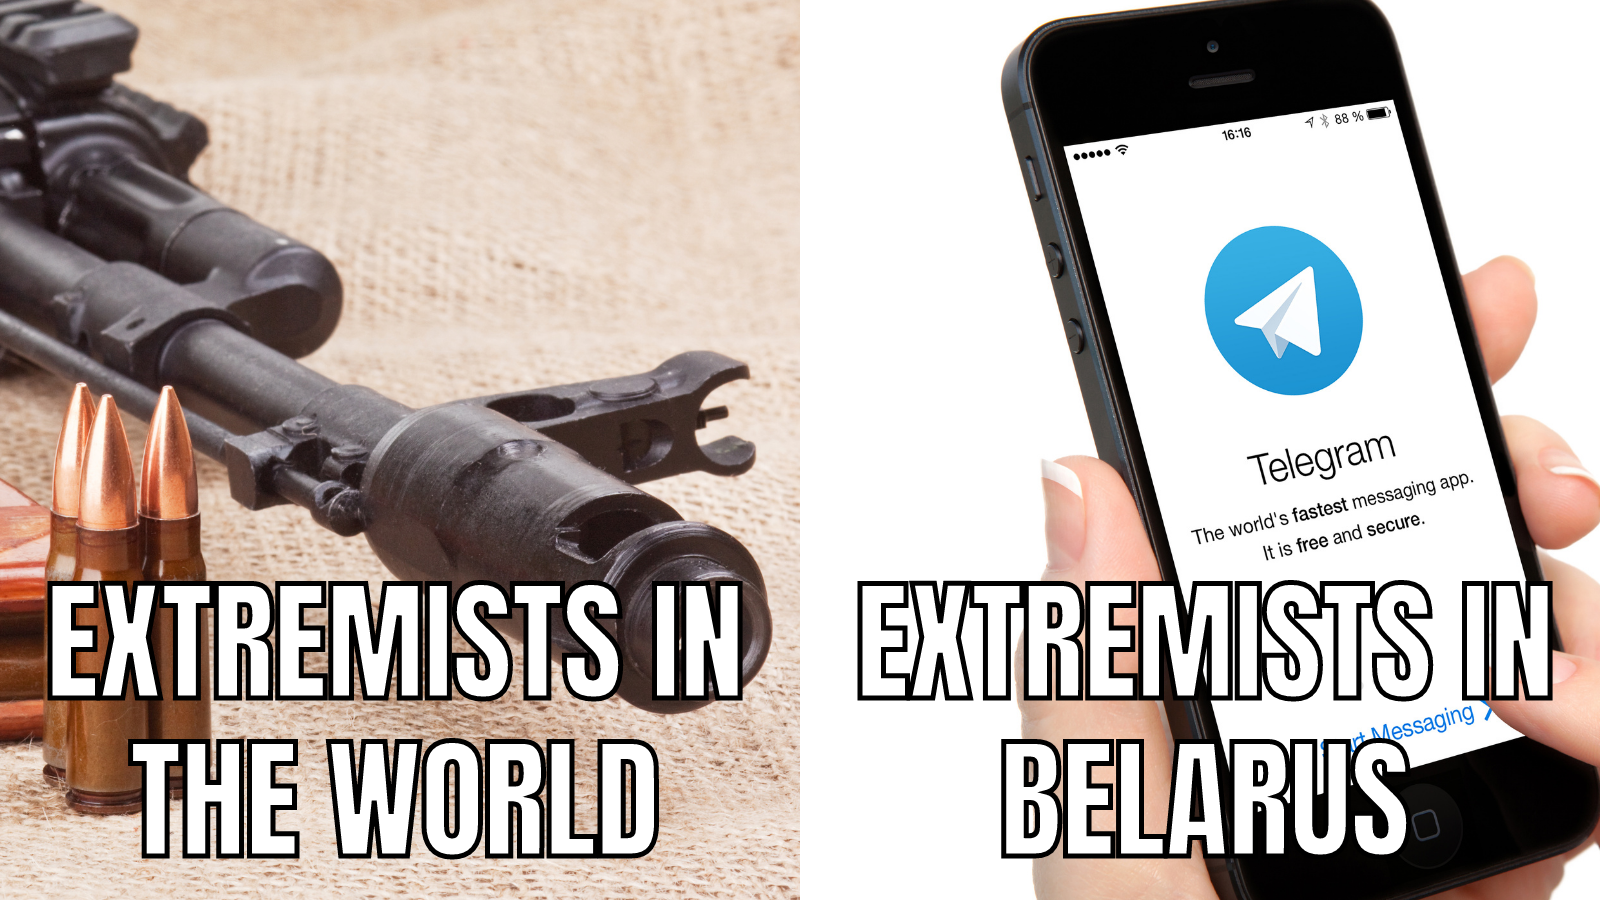 Subscribe to the “wrong” Telegram channel and get seven years of jail in Belarus